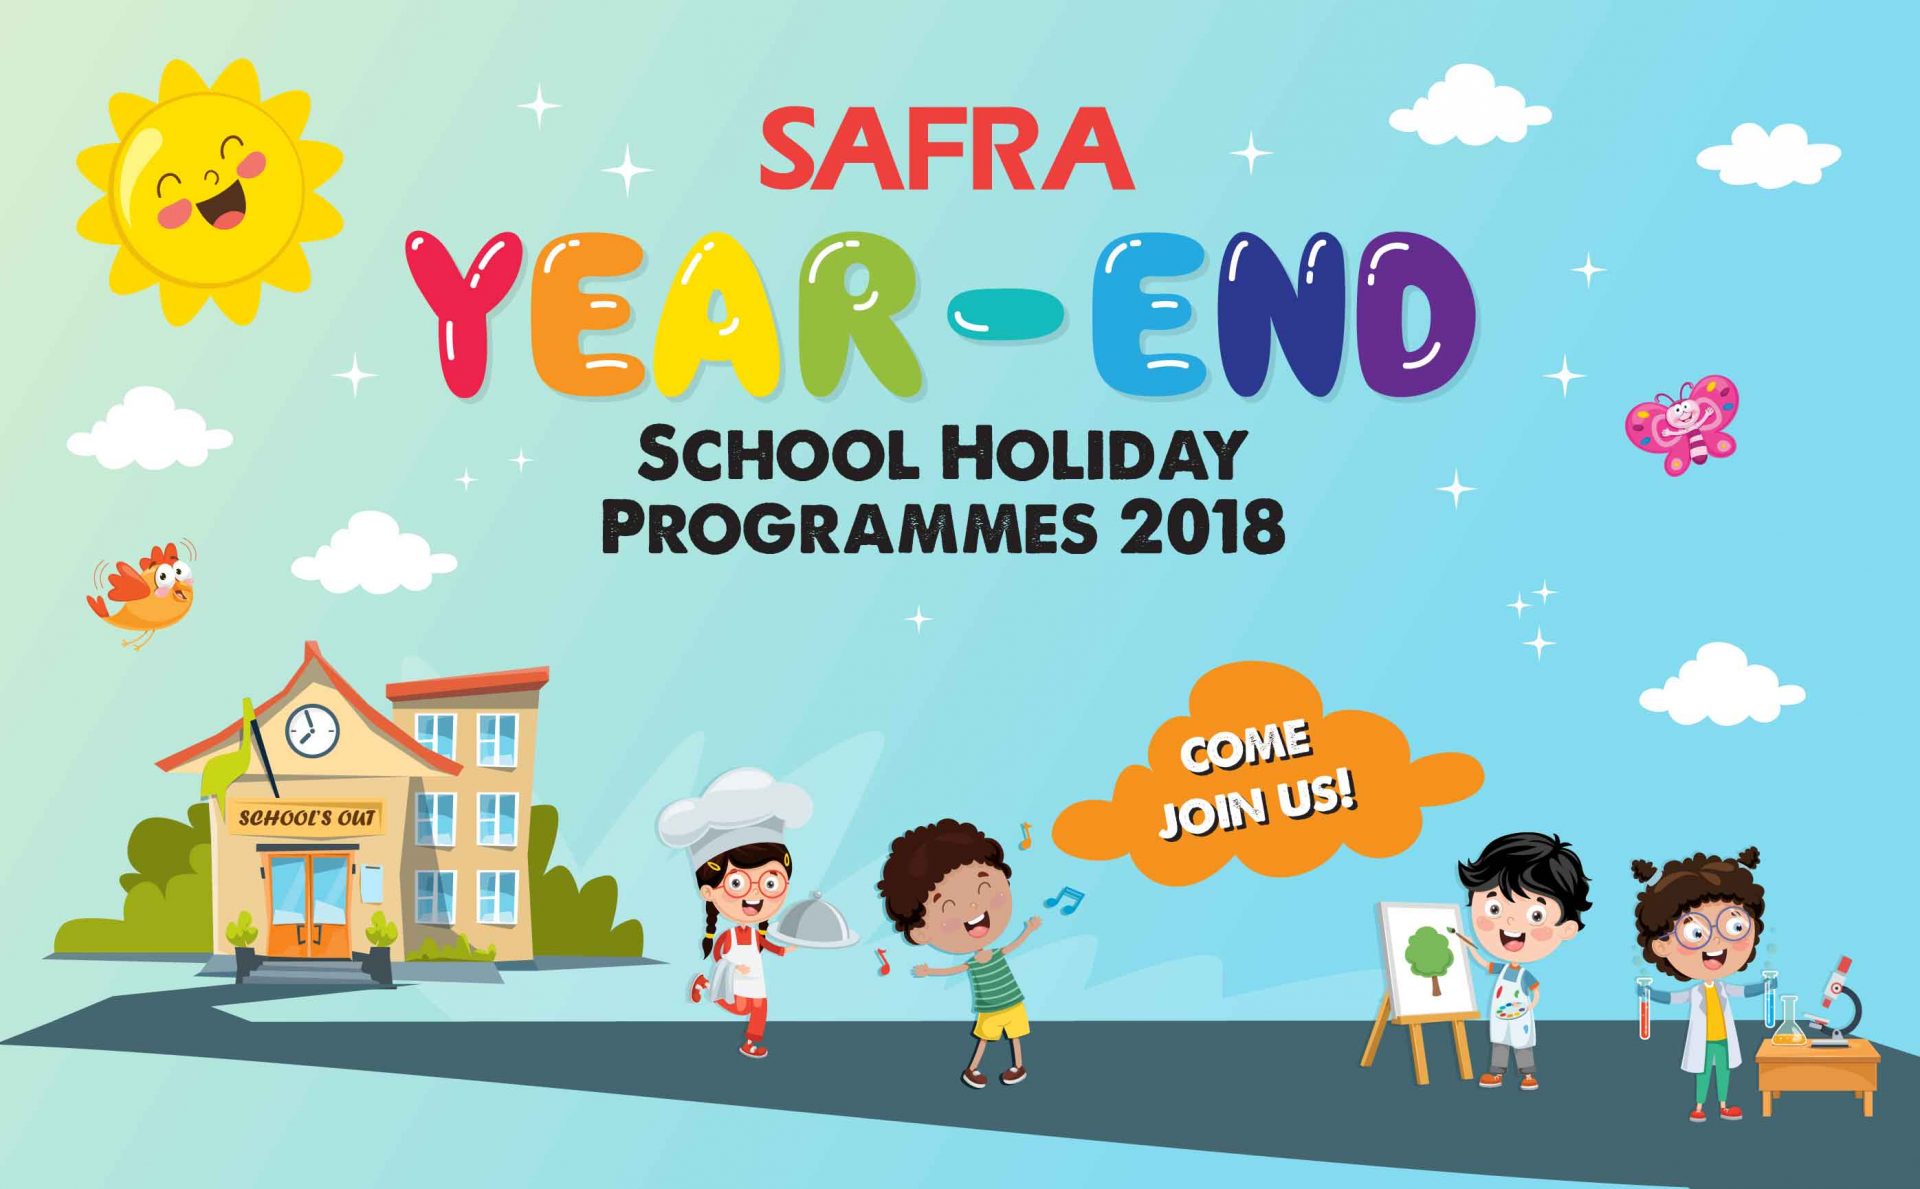 SAFRA Clubs Have Holiday LightUps, Cool For Kids And A